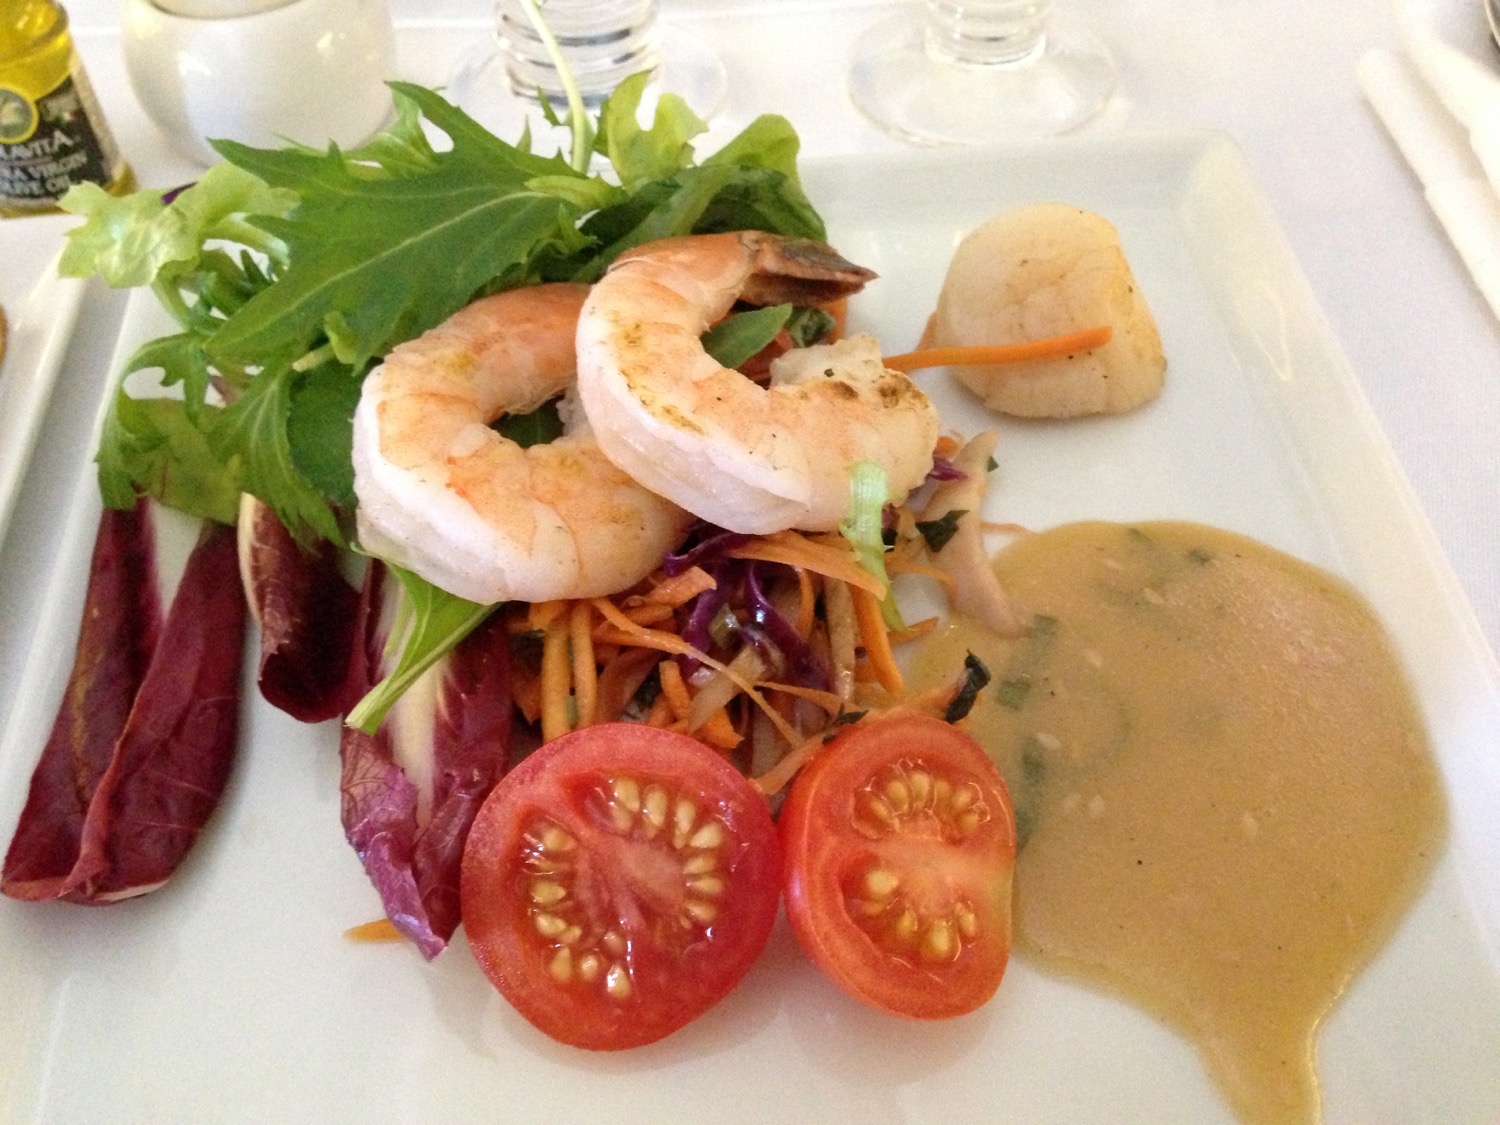 a plate of food with shrimp and vegetables